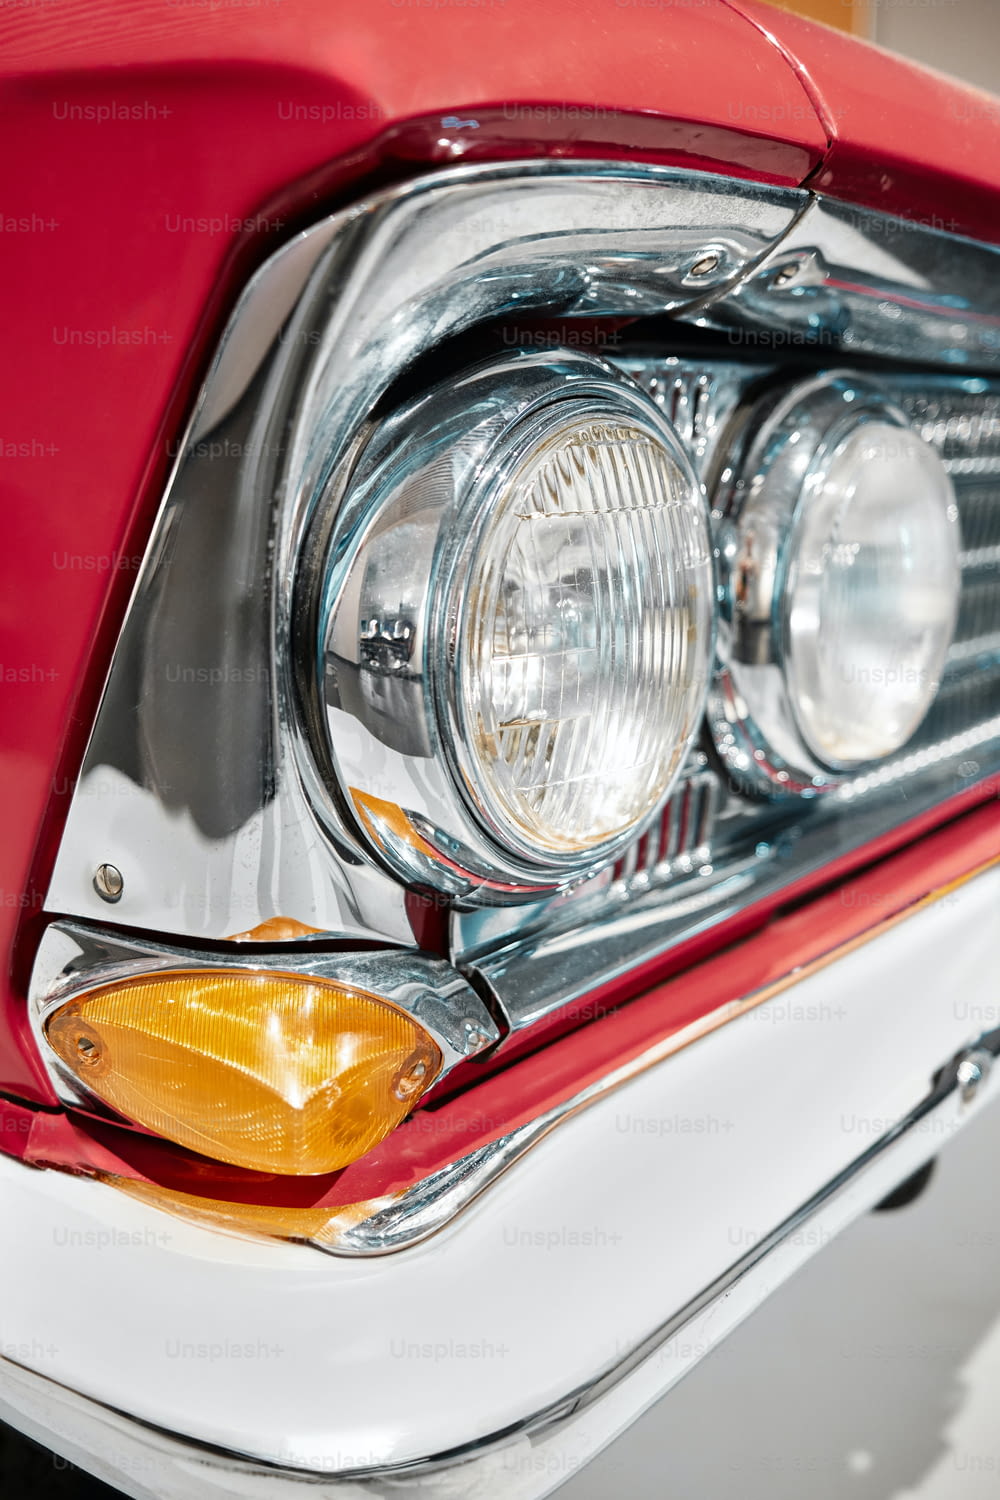 a close up of a red and white car headlight